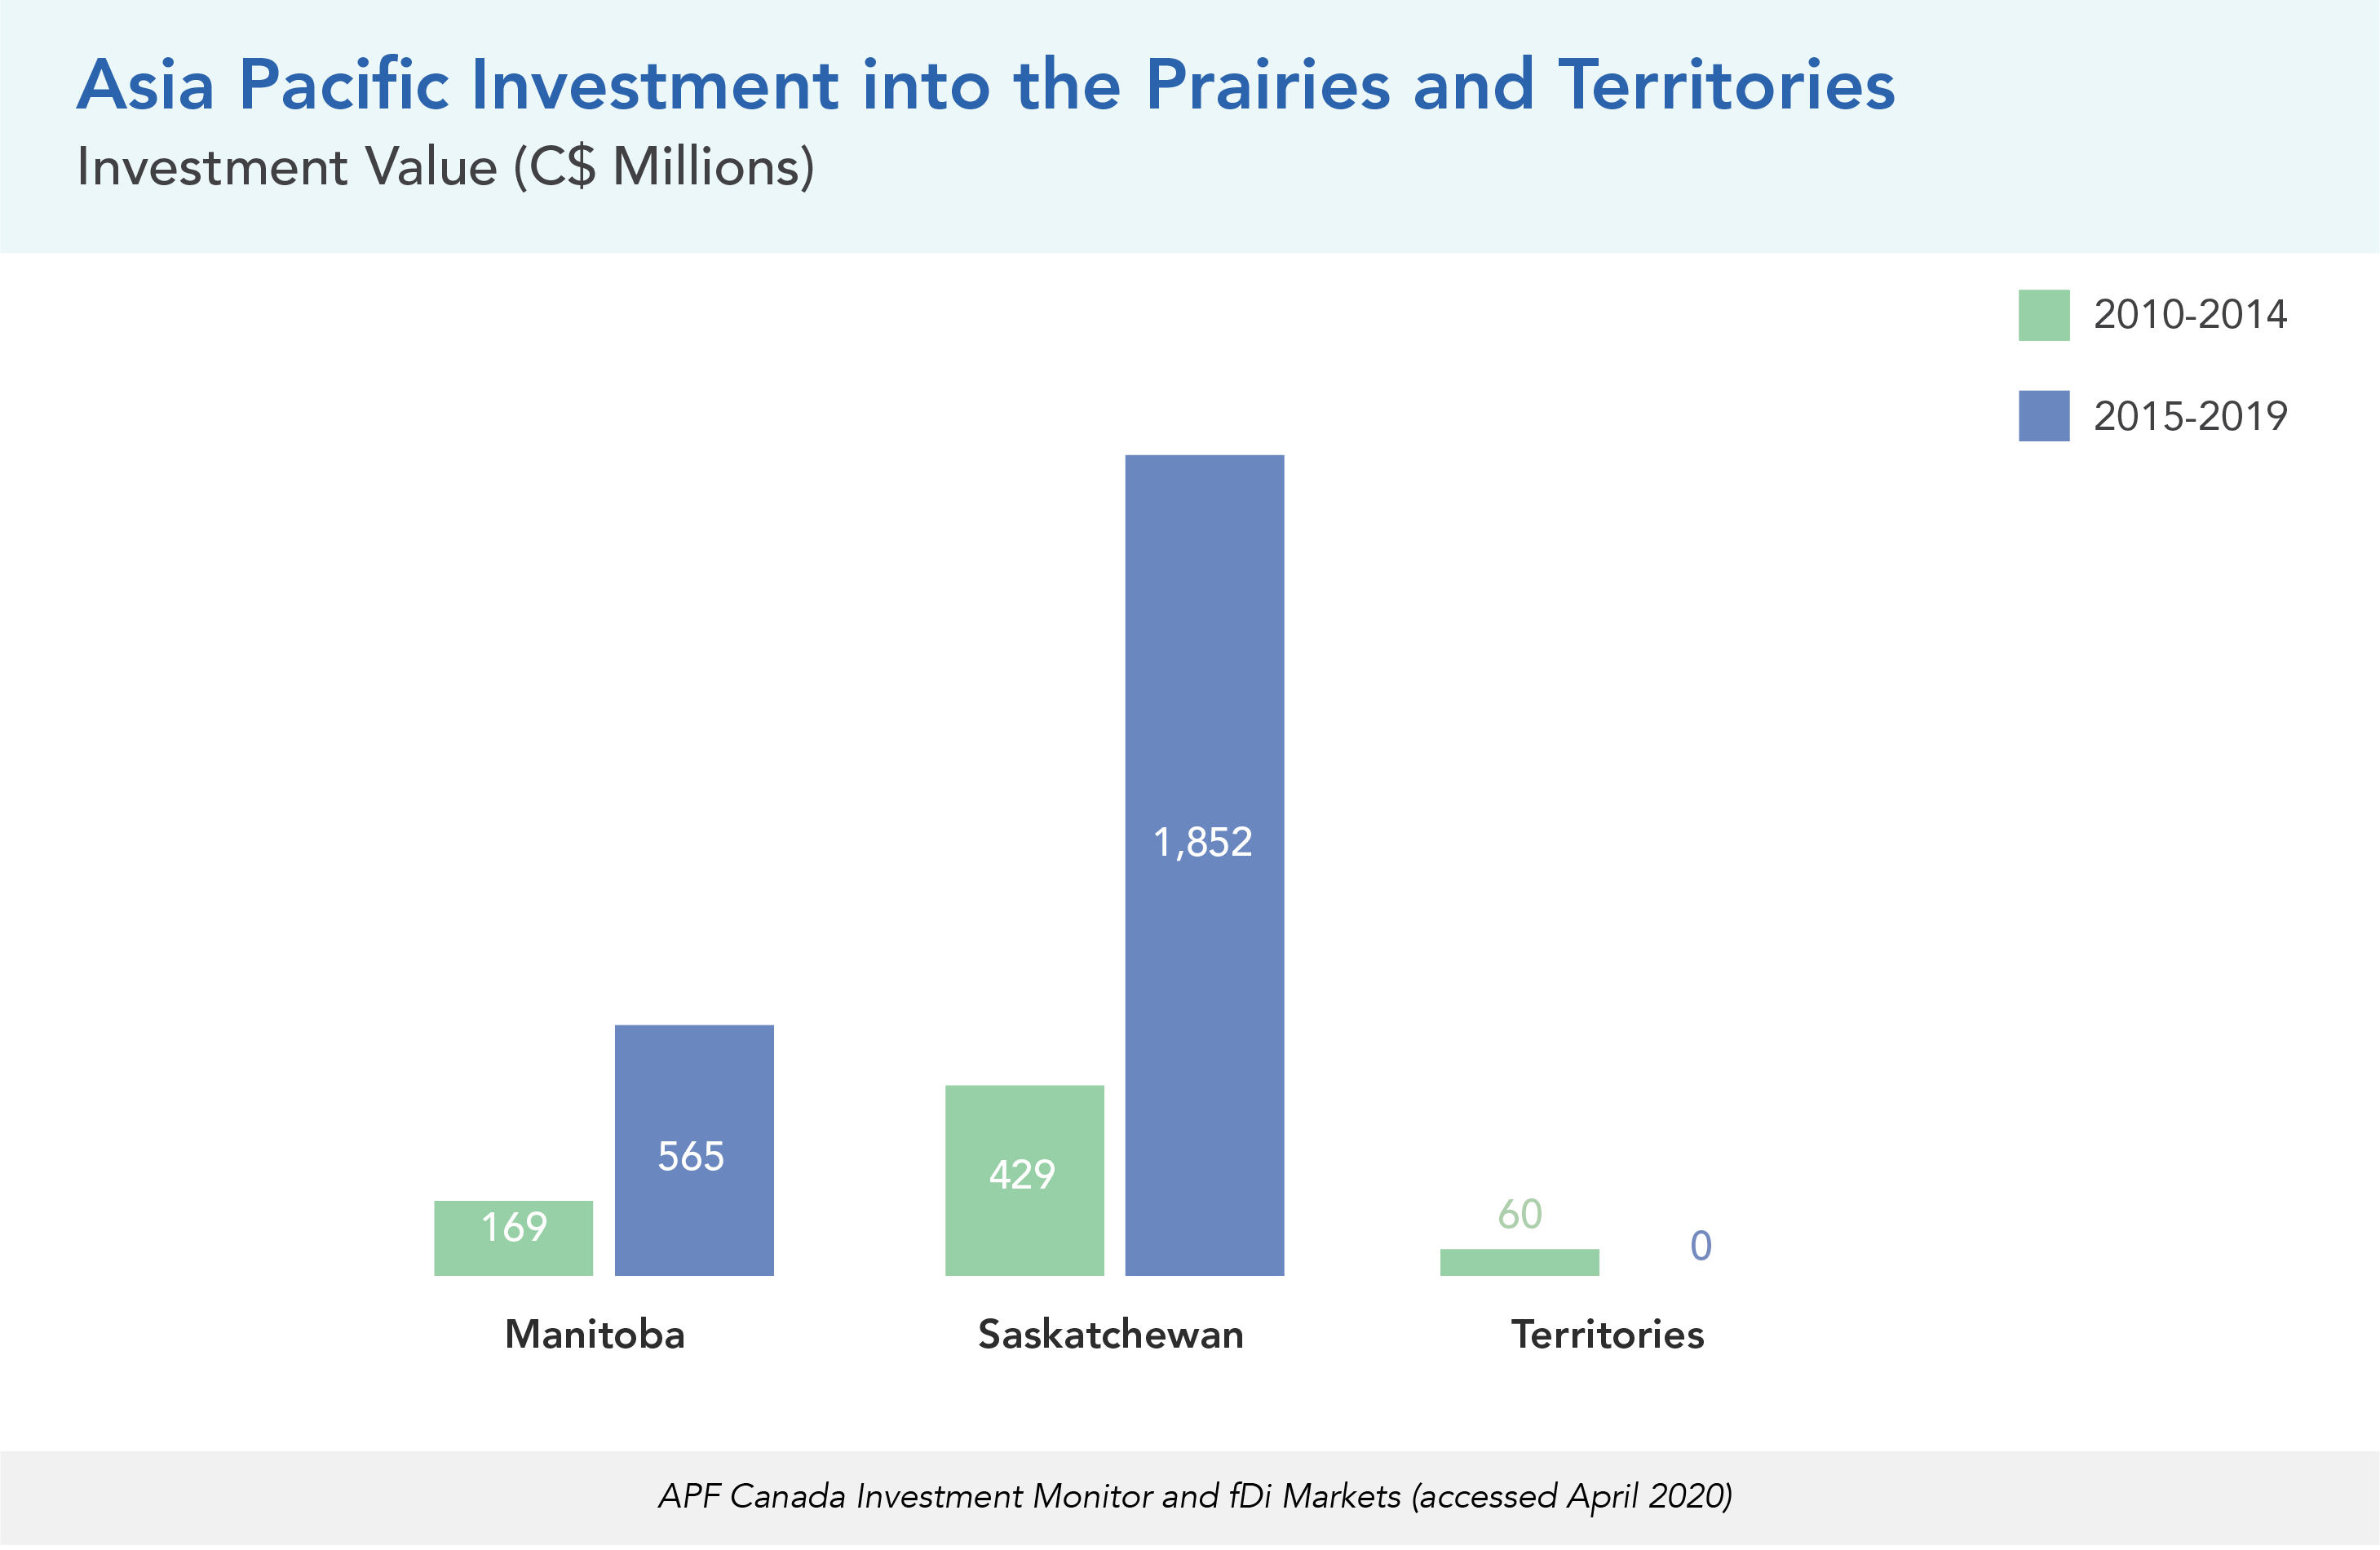 Asia Pacific Investment into the Prairies and Territories